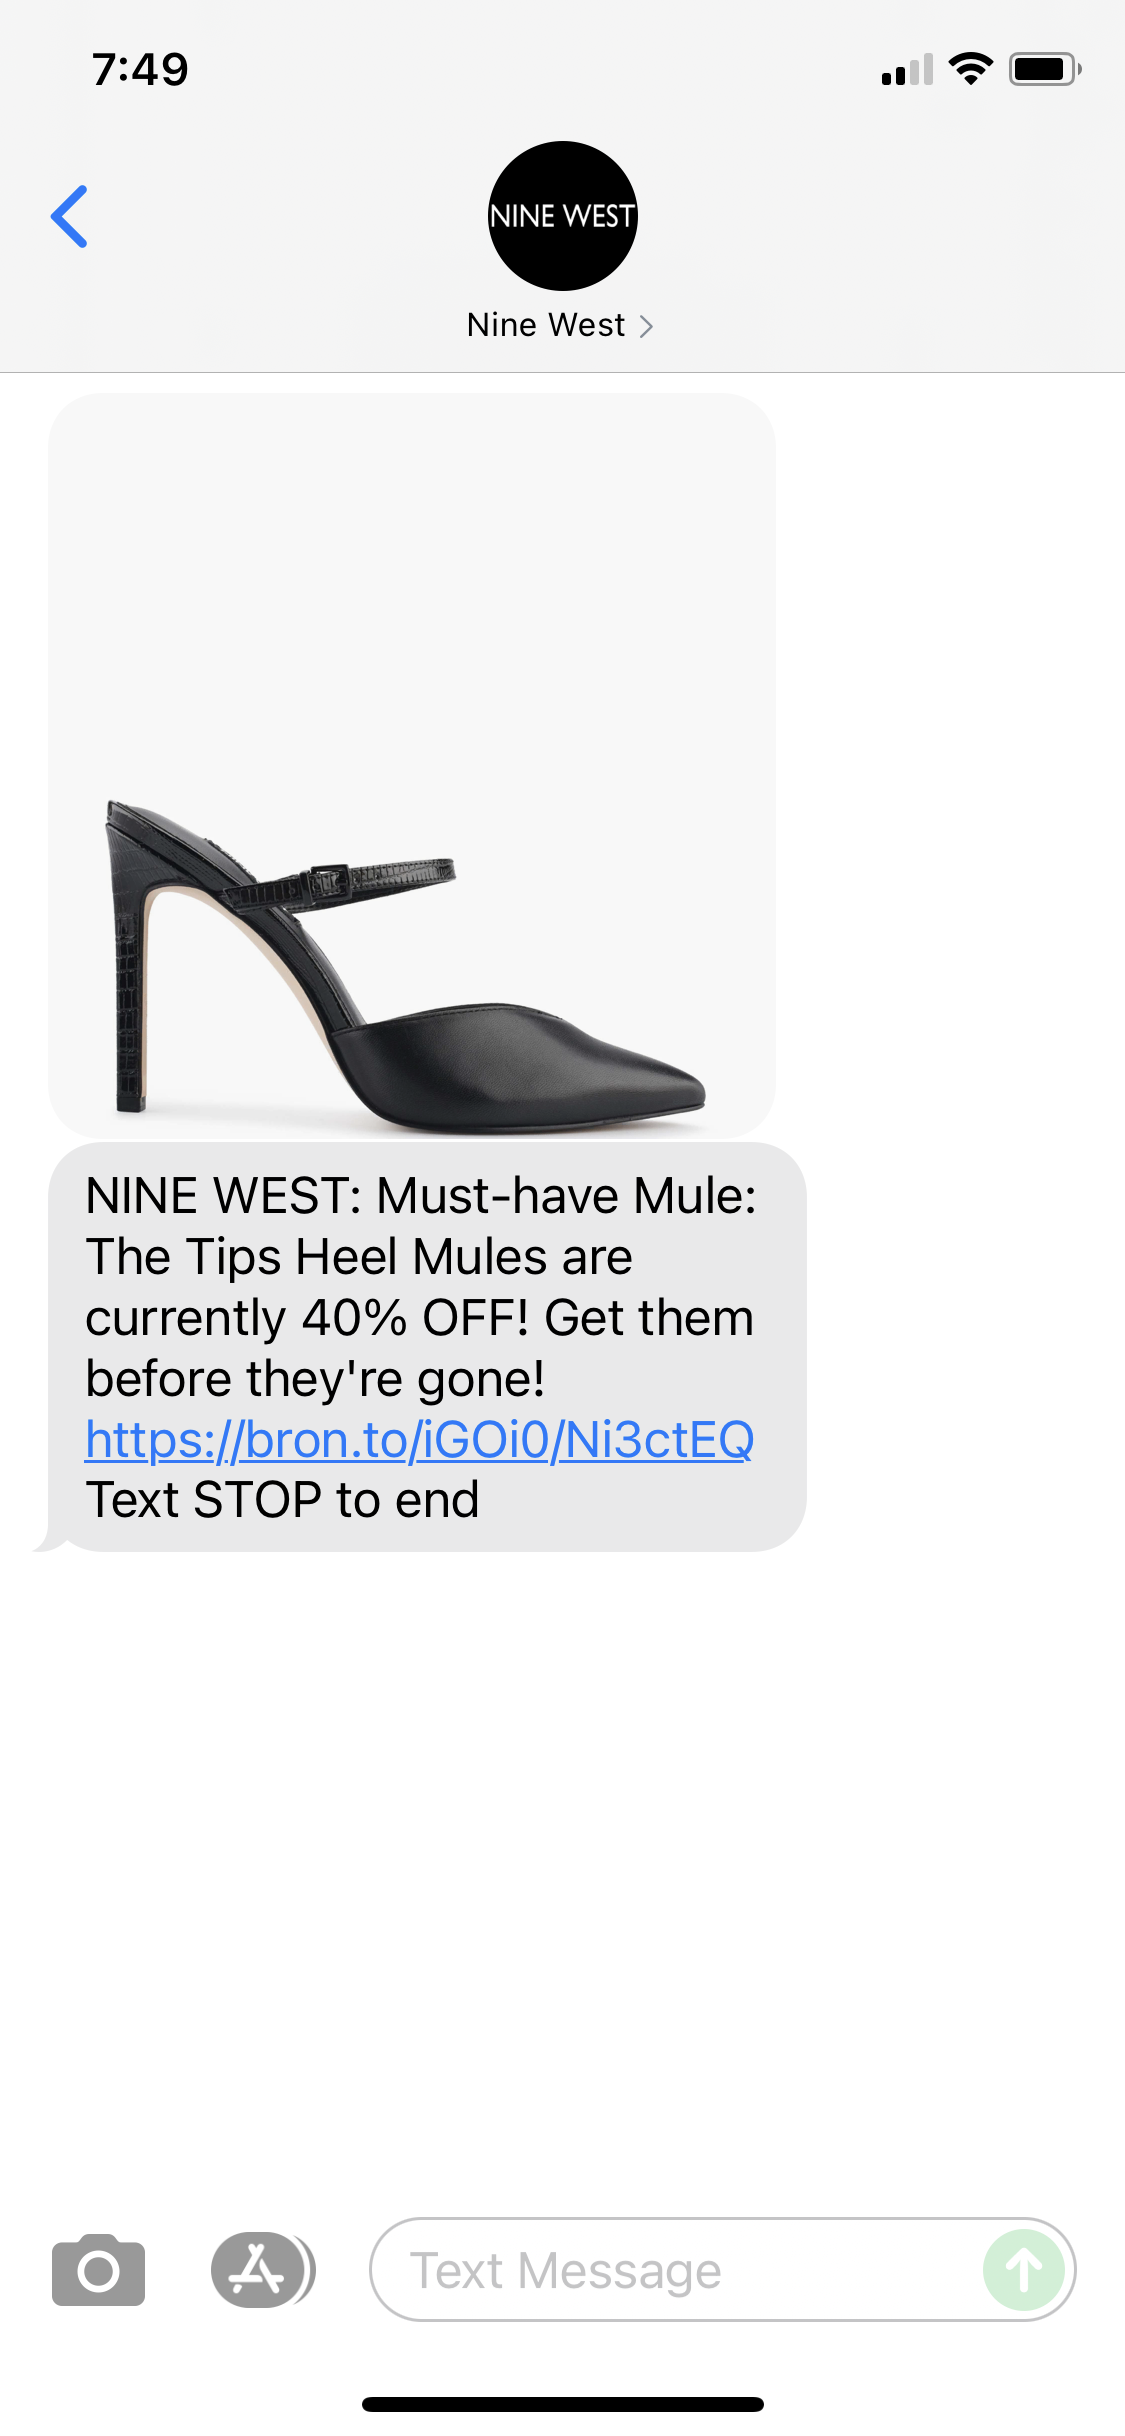 Nine West Text Message Marketing Example 08.15.2021 SMS Archives